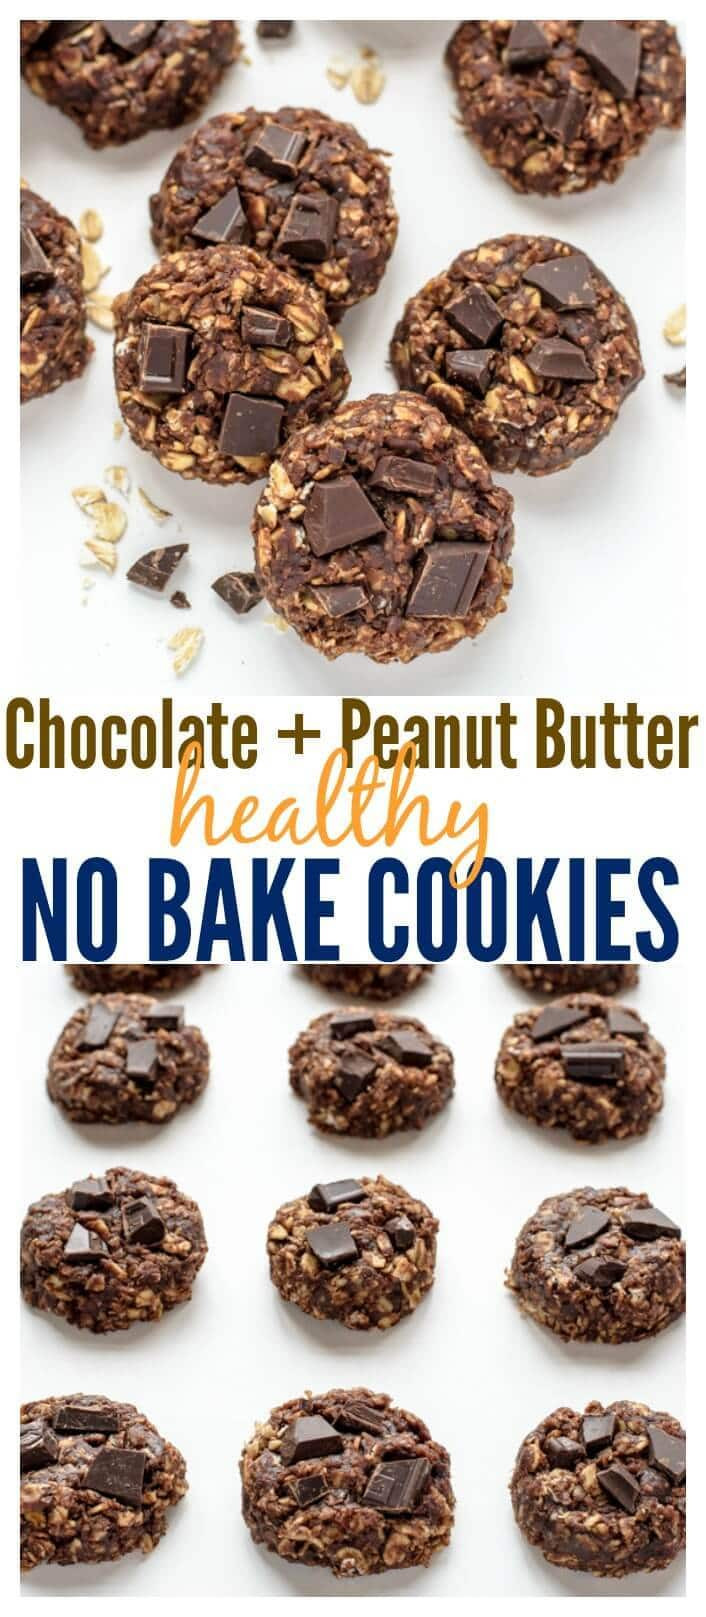 No Bake Healthy Cookies
 Healthy No Bake Cookies with Chocolate and Peanut Butter